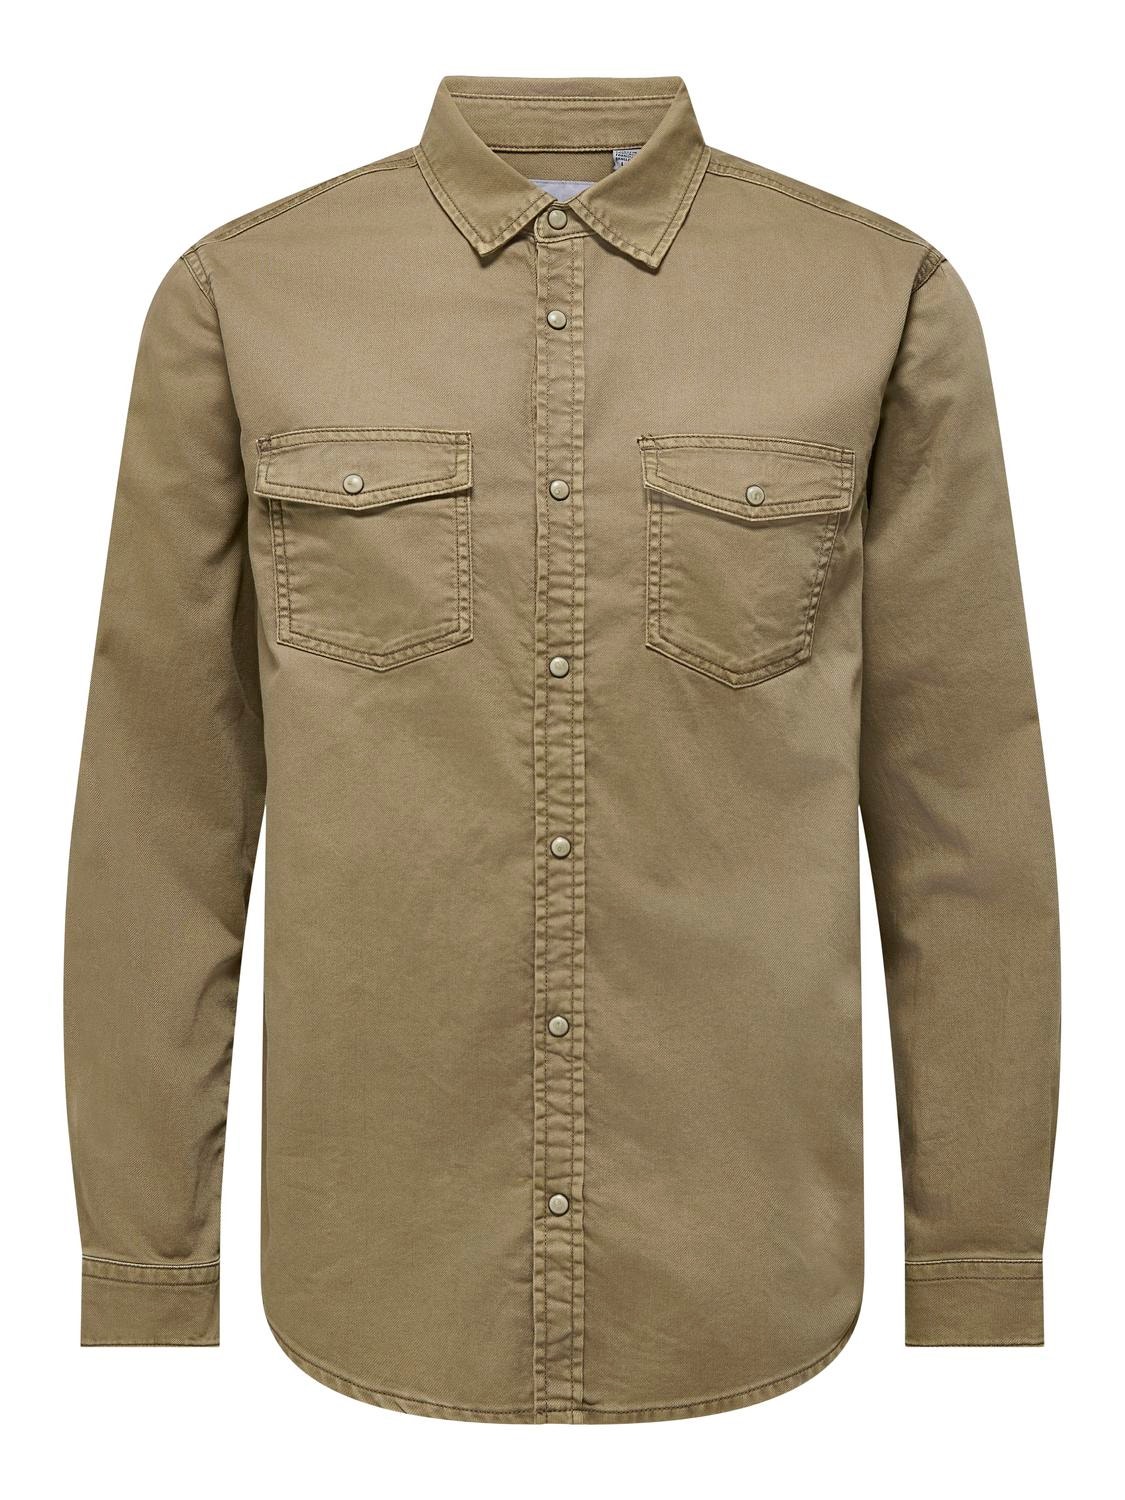 ONLY & SONS Denim shirt with chest pockets -Walnut - 22023247